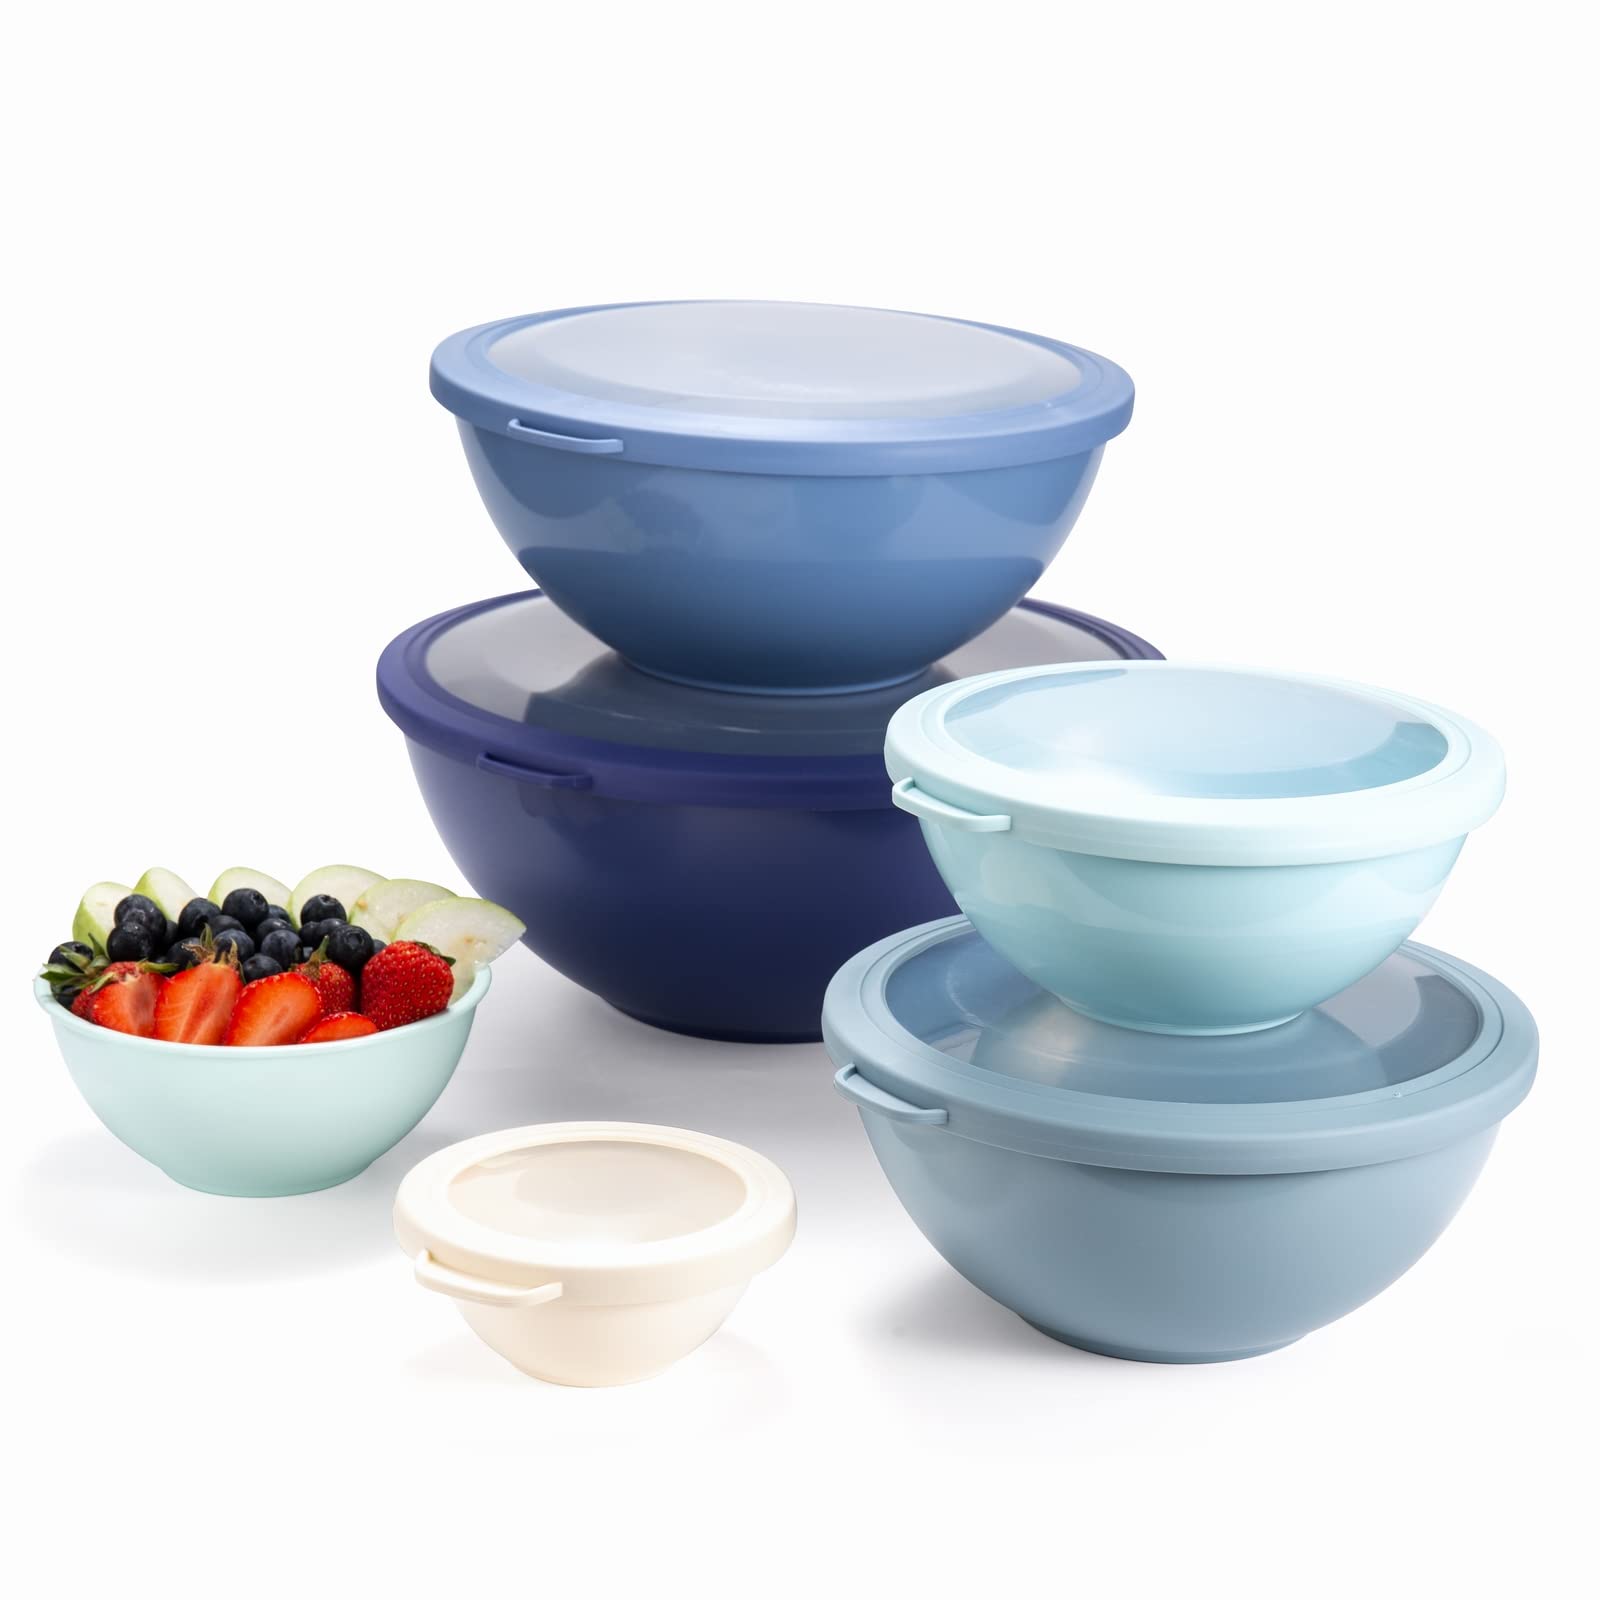 COOK WITH COLOR Mixing Bowls with TPR Lids - 12 Piece Plastic Nesting Bowls Set includes 6 Prep Bowls and 6 Lids, Microwave Safe (Blue)